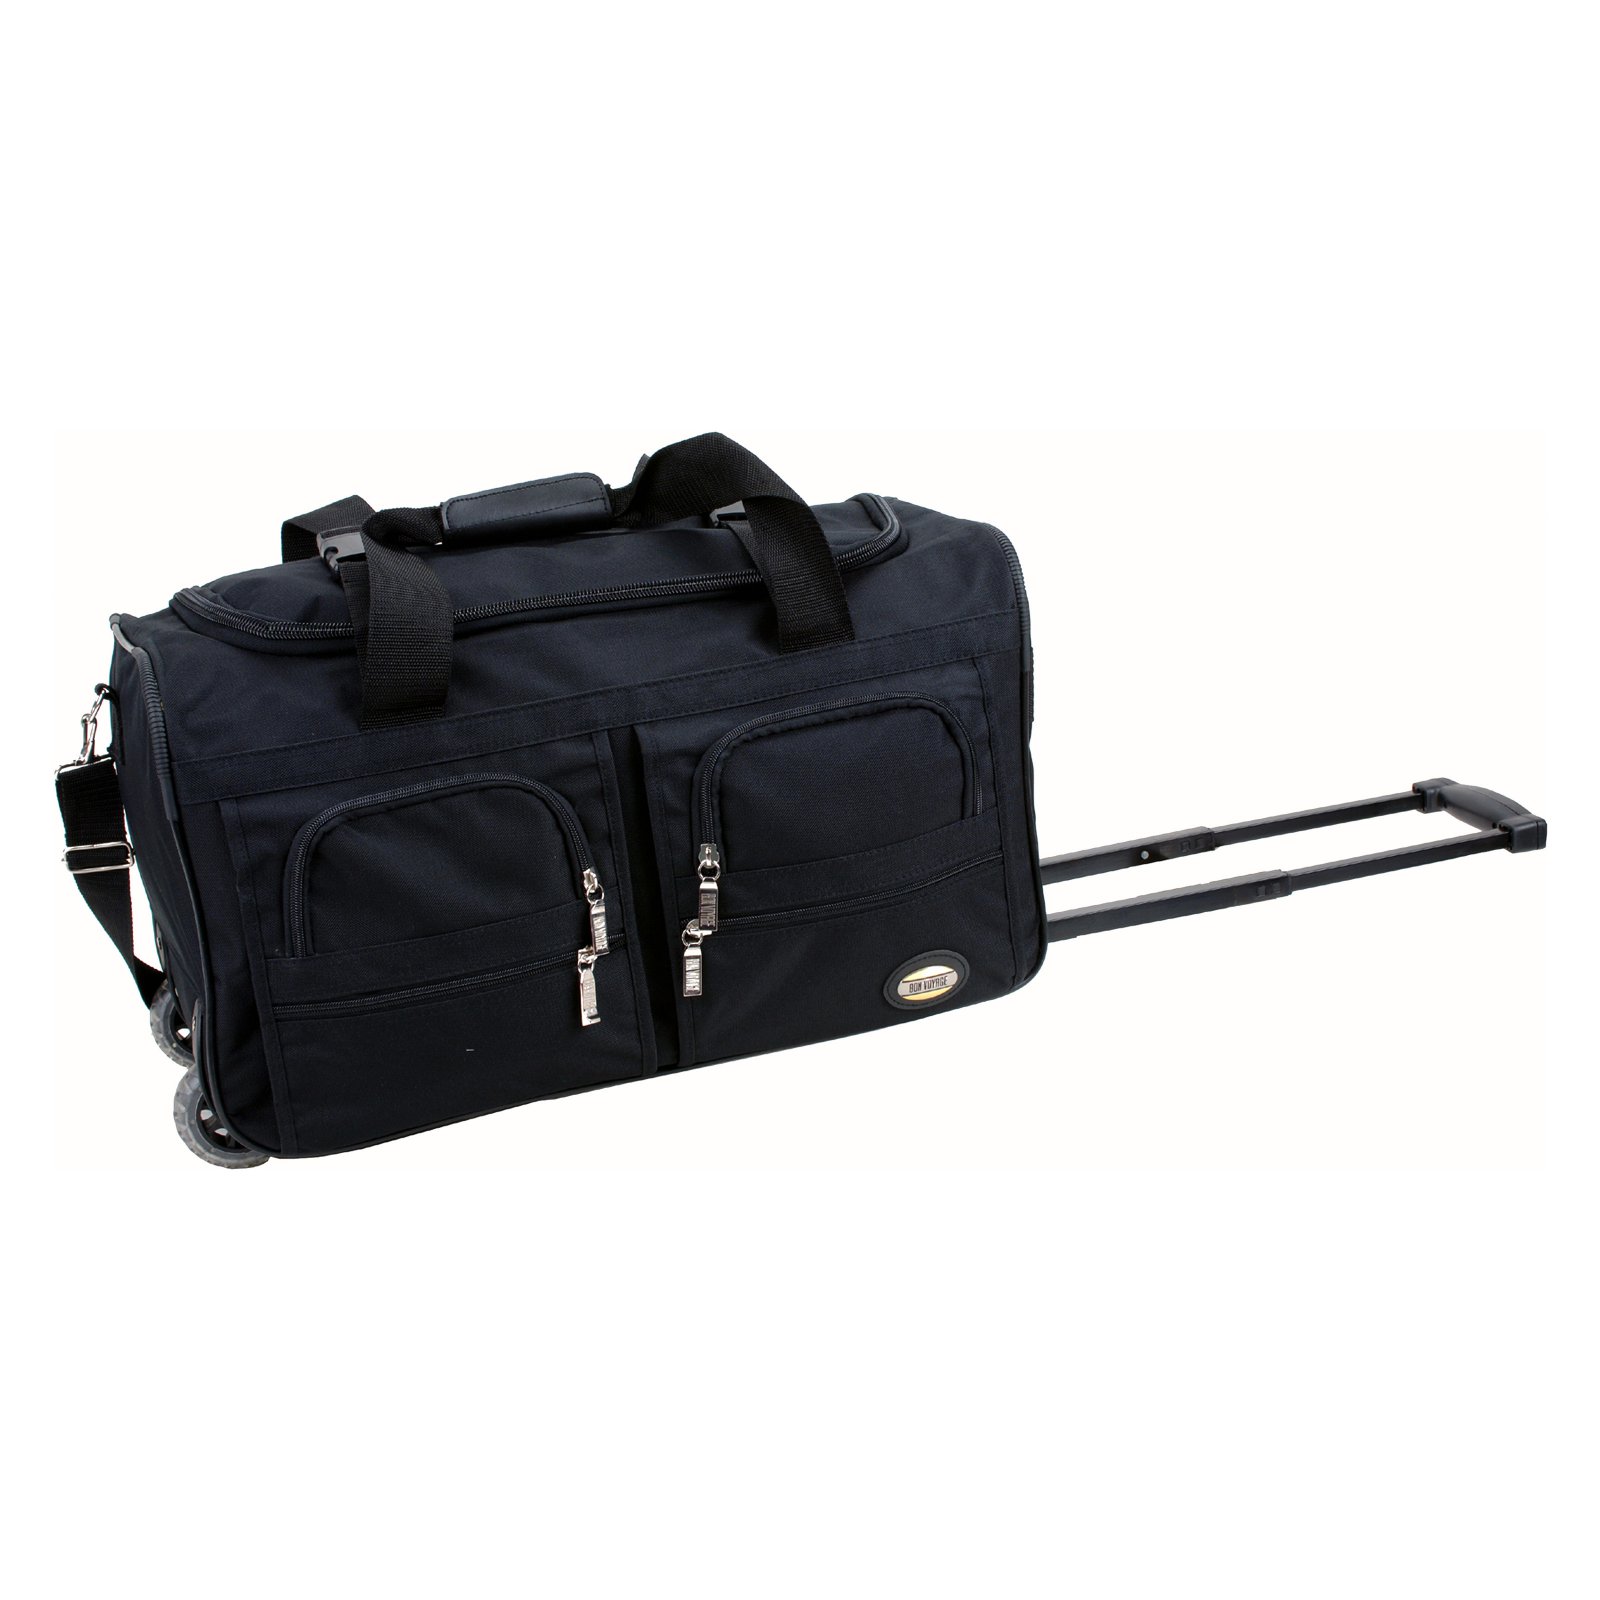 Rockland 22" Rolling Duffle Bag - image 2 of 2